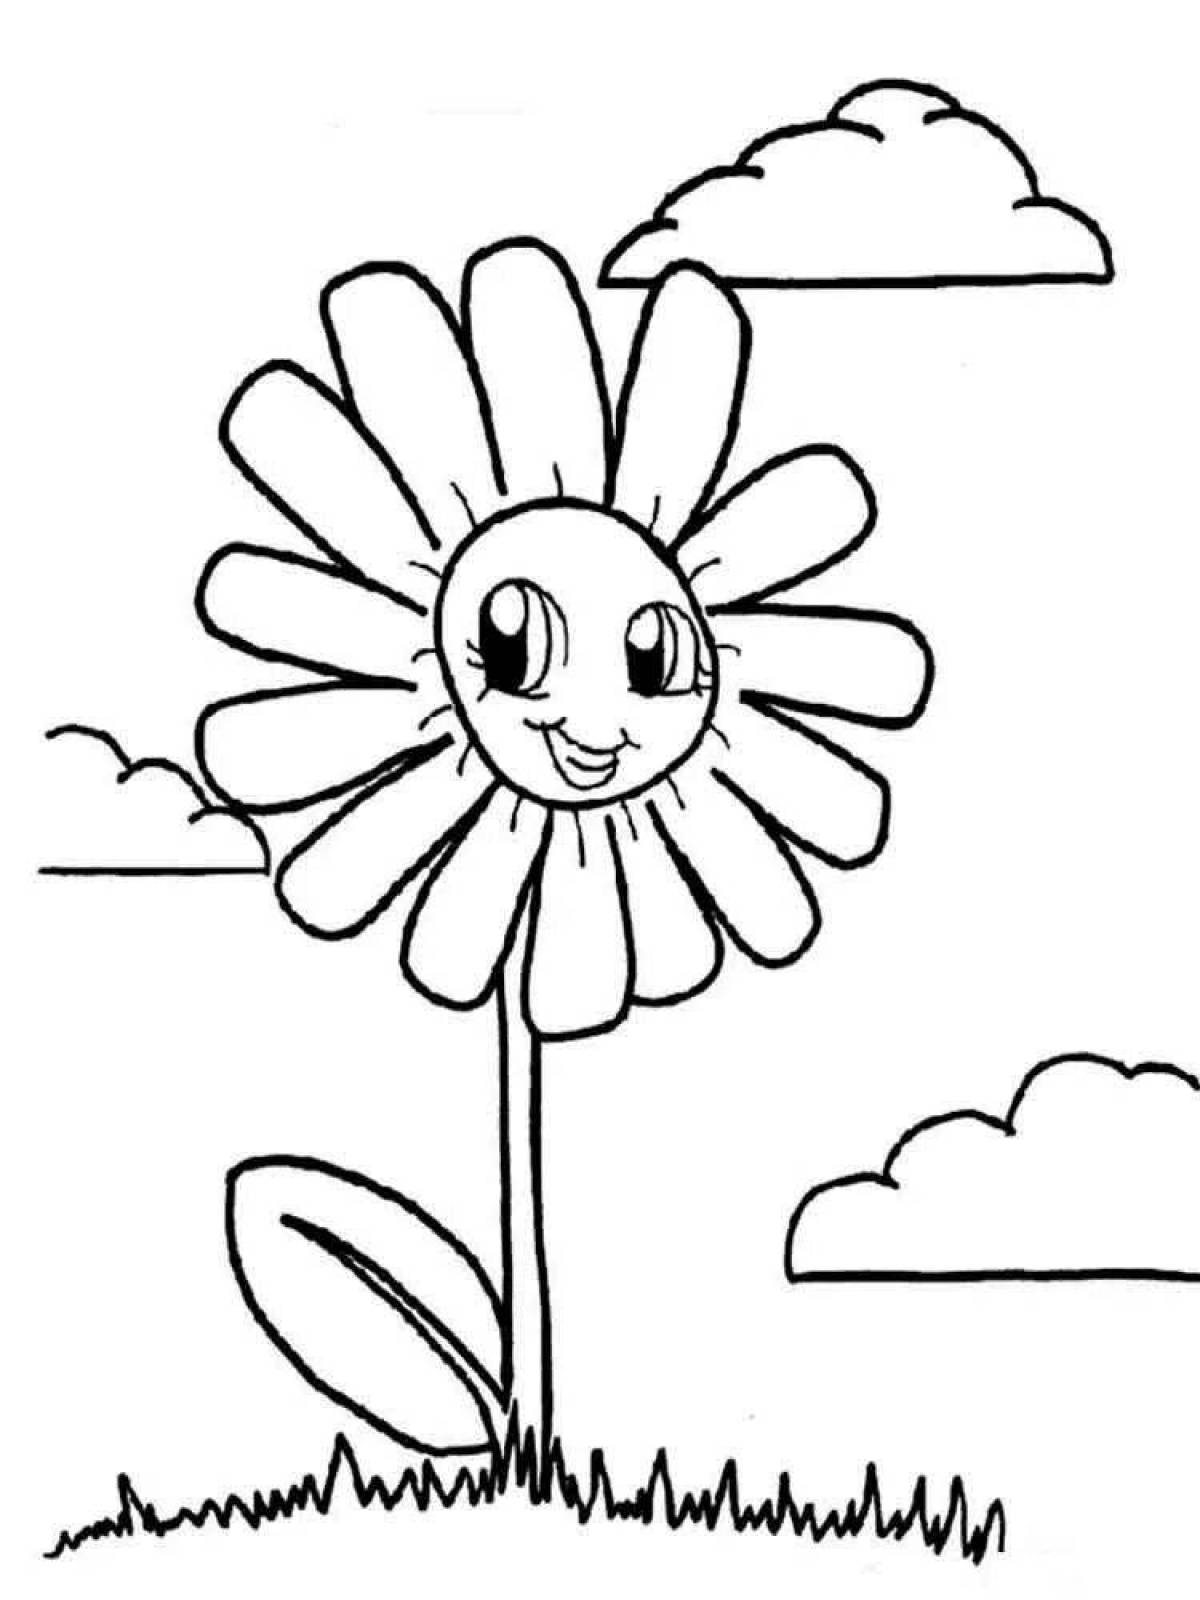 Coloring book shining chamomile flower